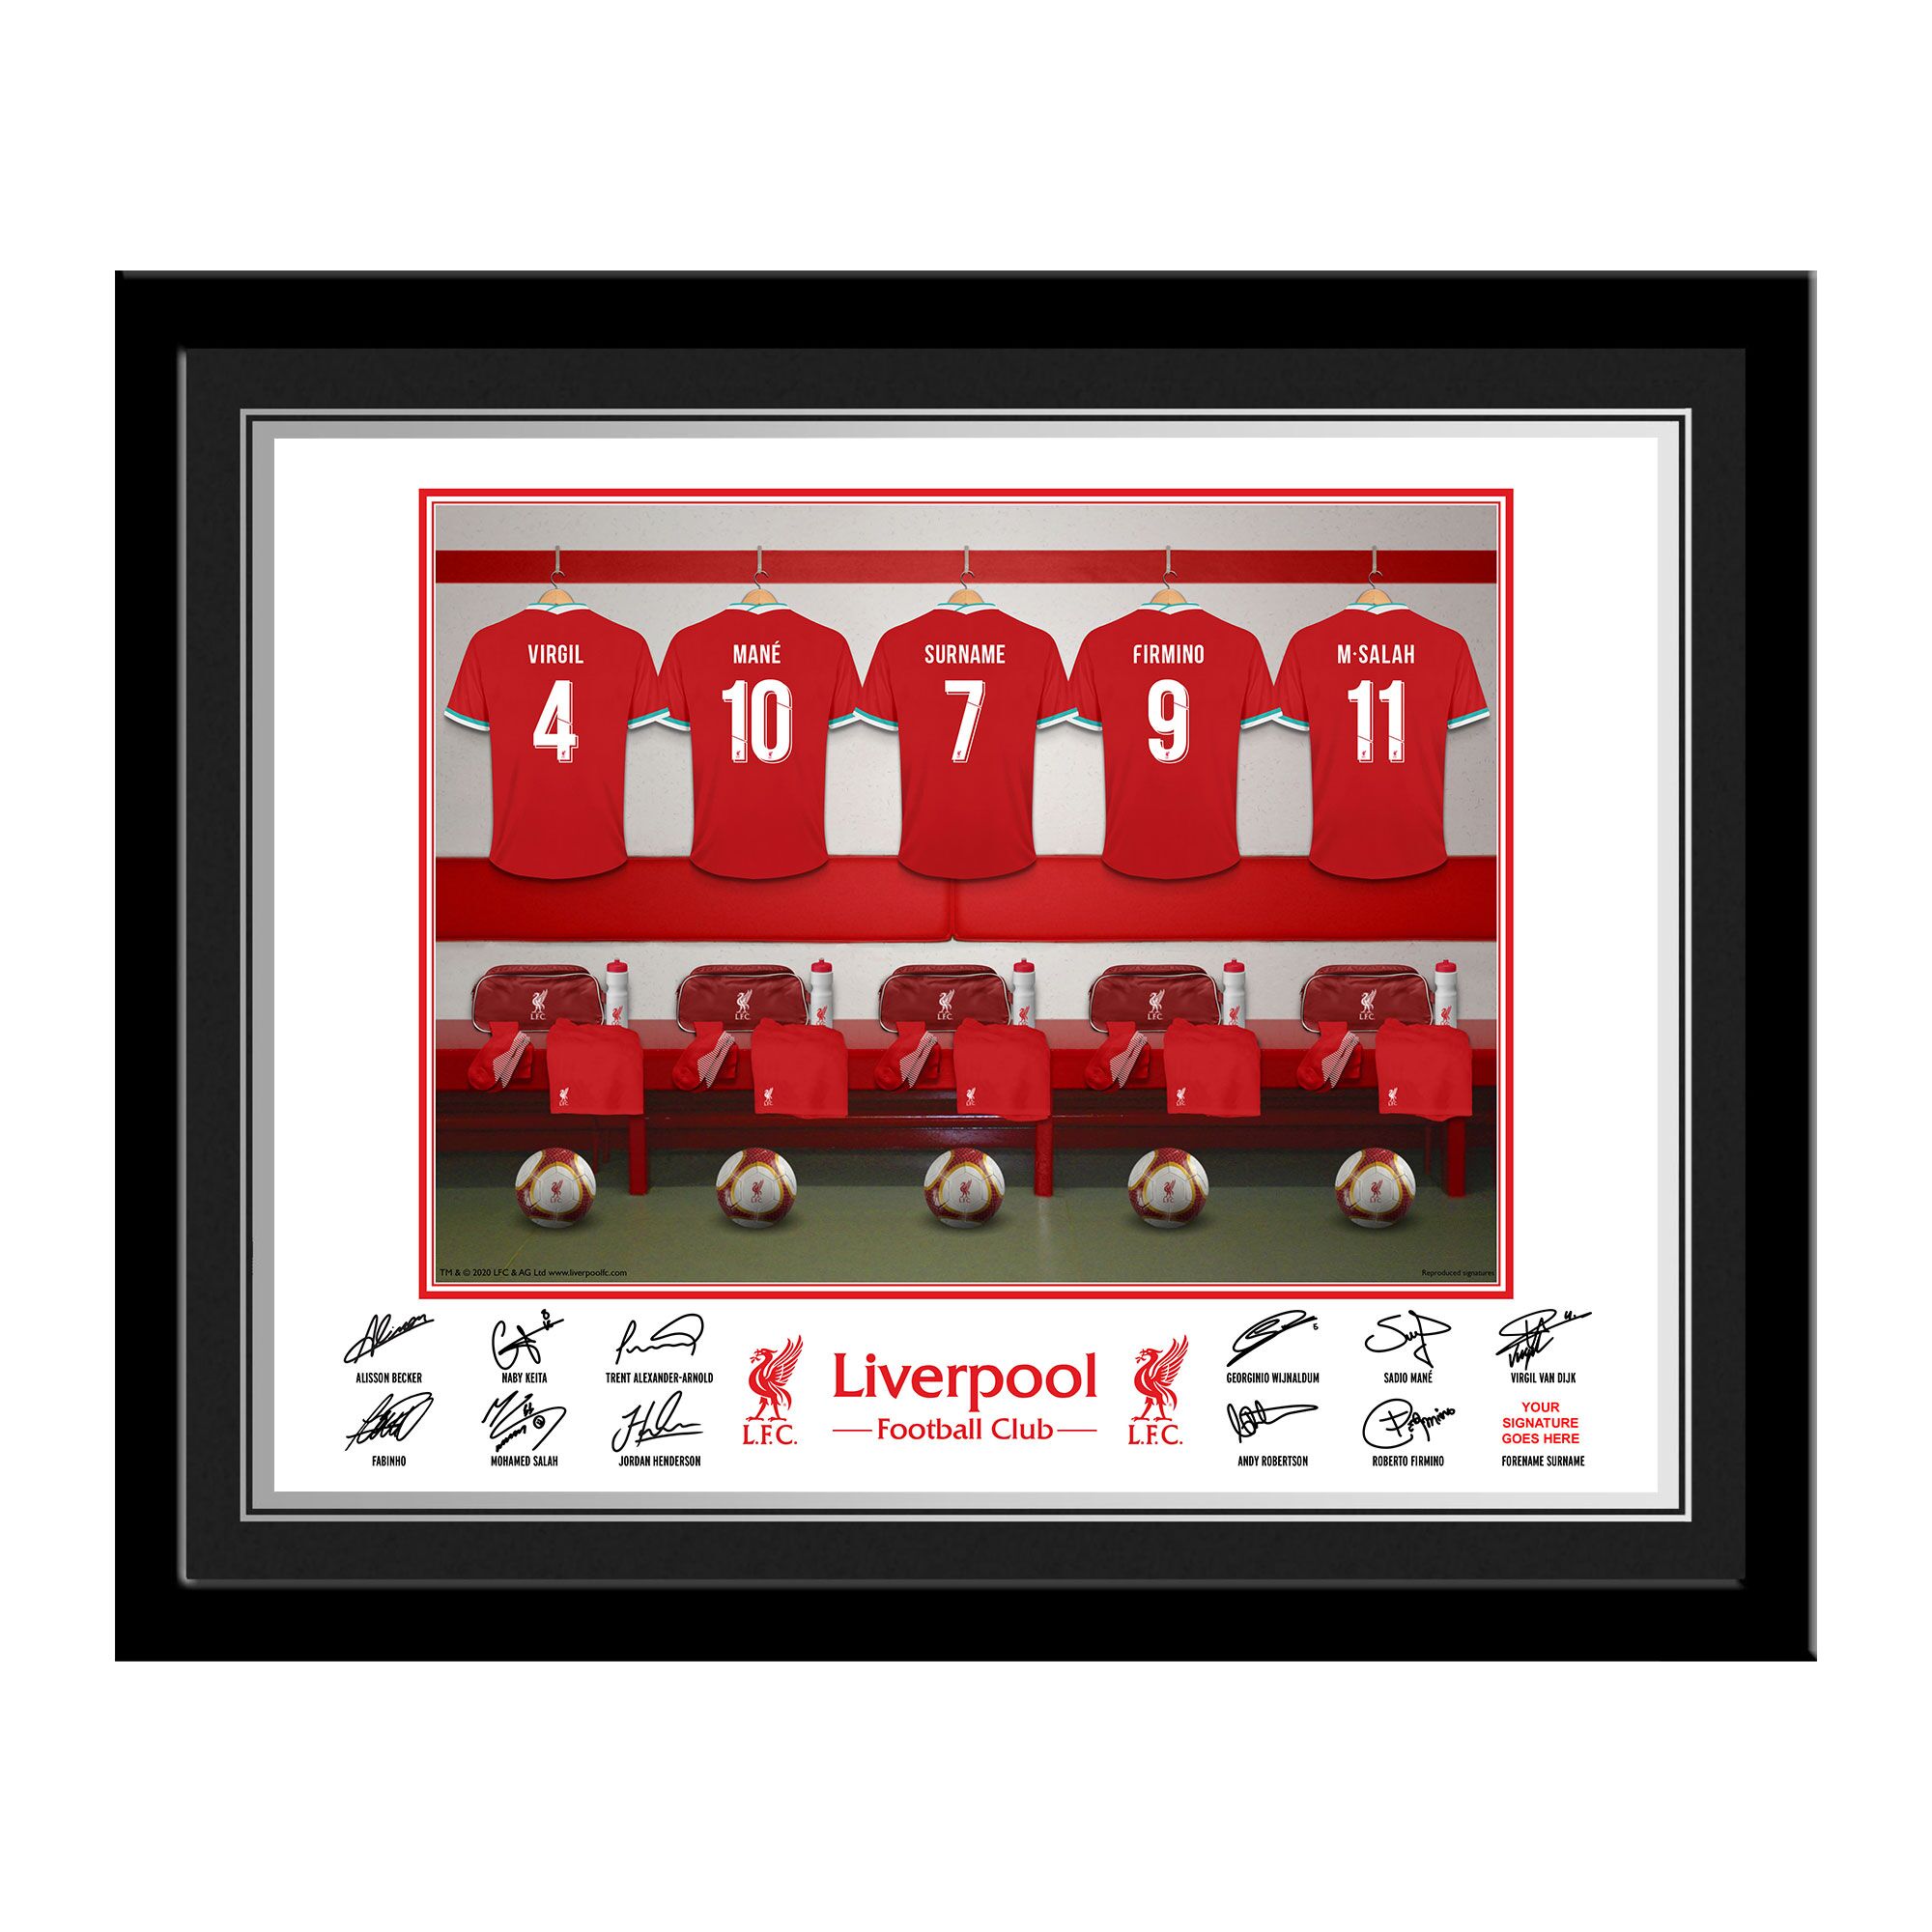 Personalised Liverpool FC Dressing Room Framed Photo